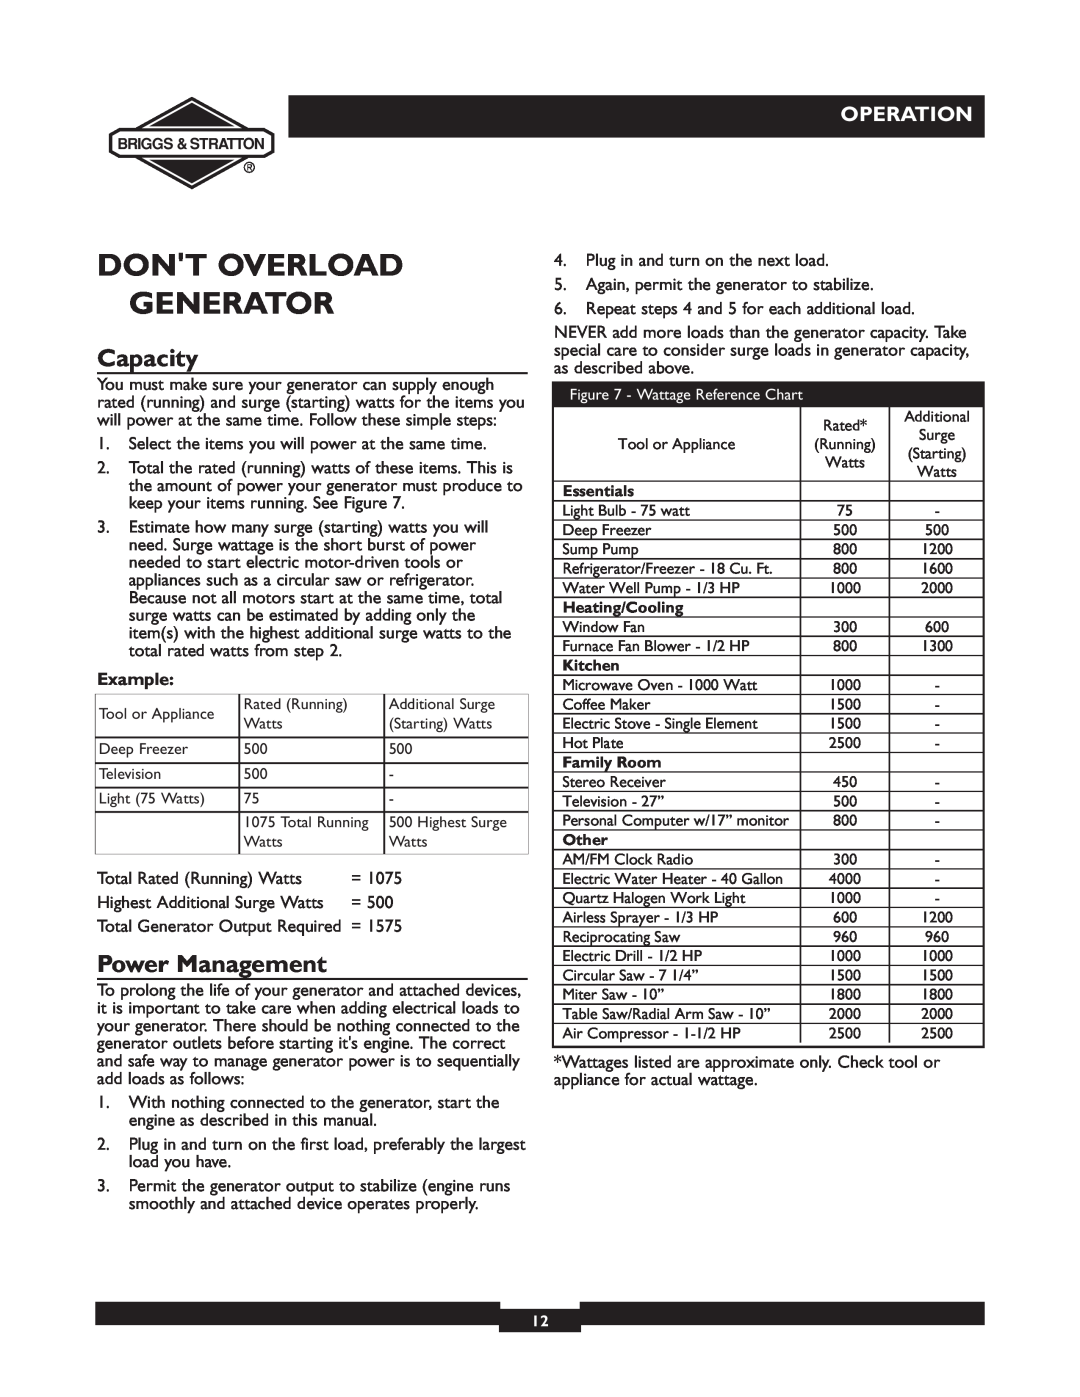 Briggs & Stratton 01532-4 owner manual Dont Overload Generator, Capacity, Power Management, Example, Operation 